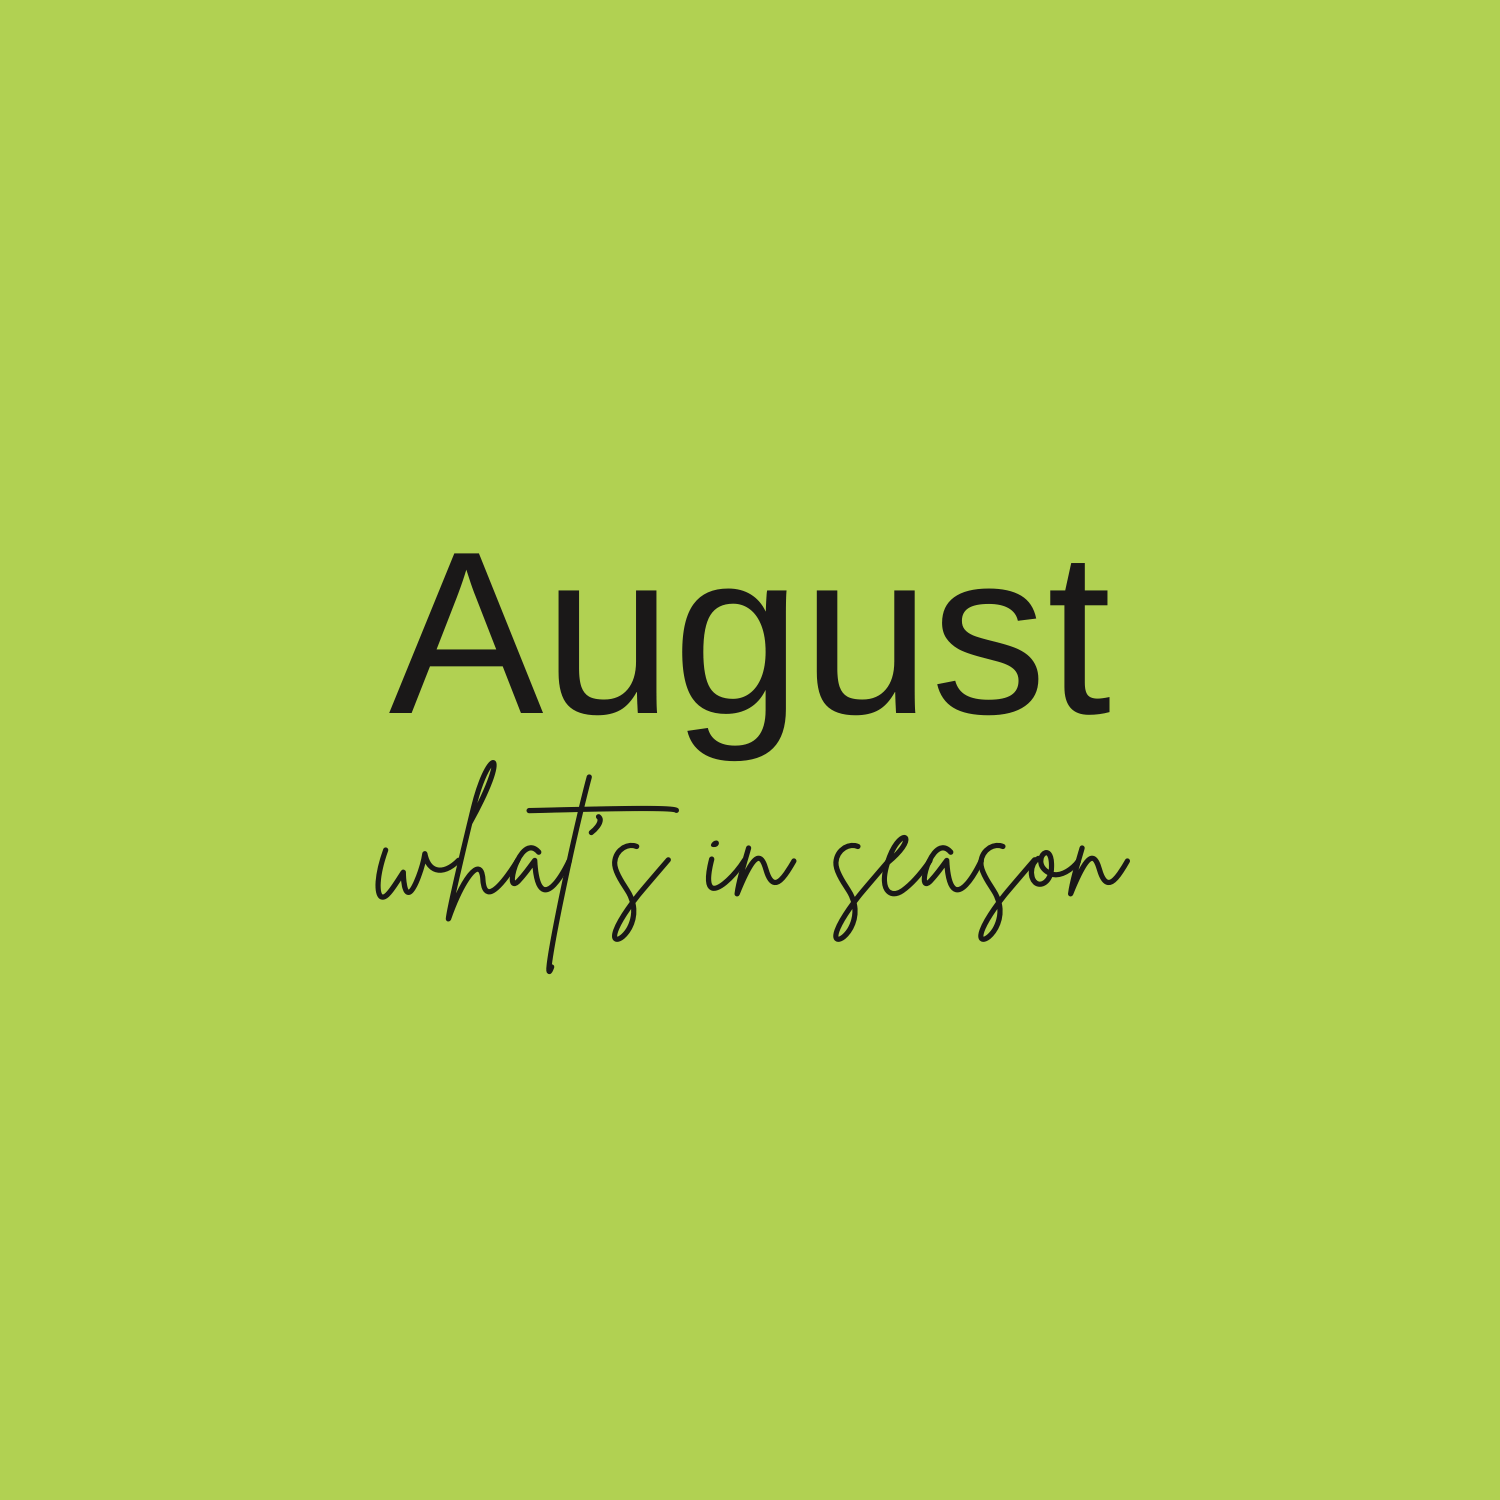 -What’s in Season in August?